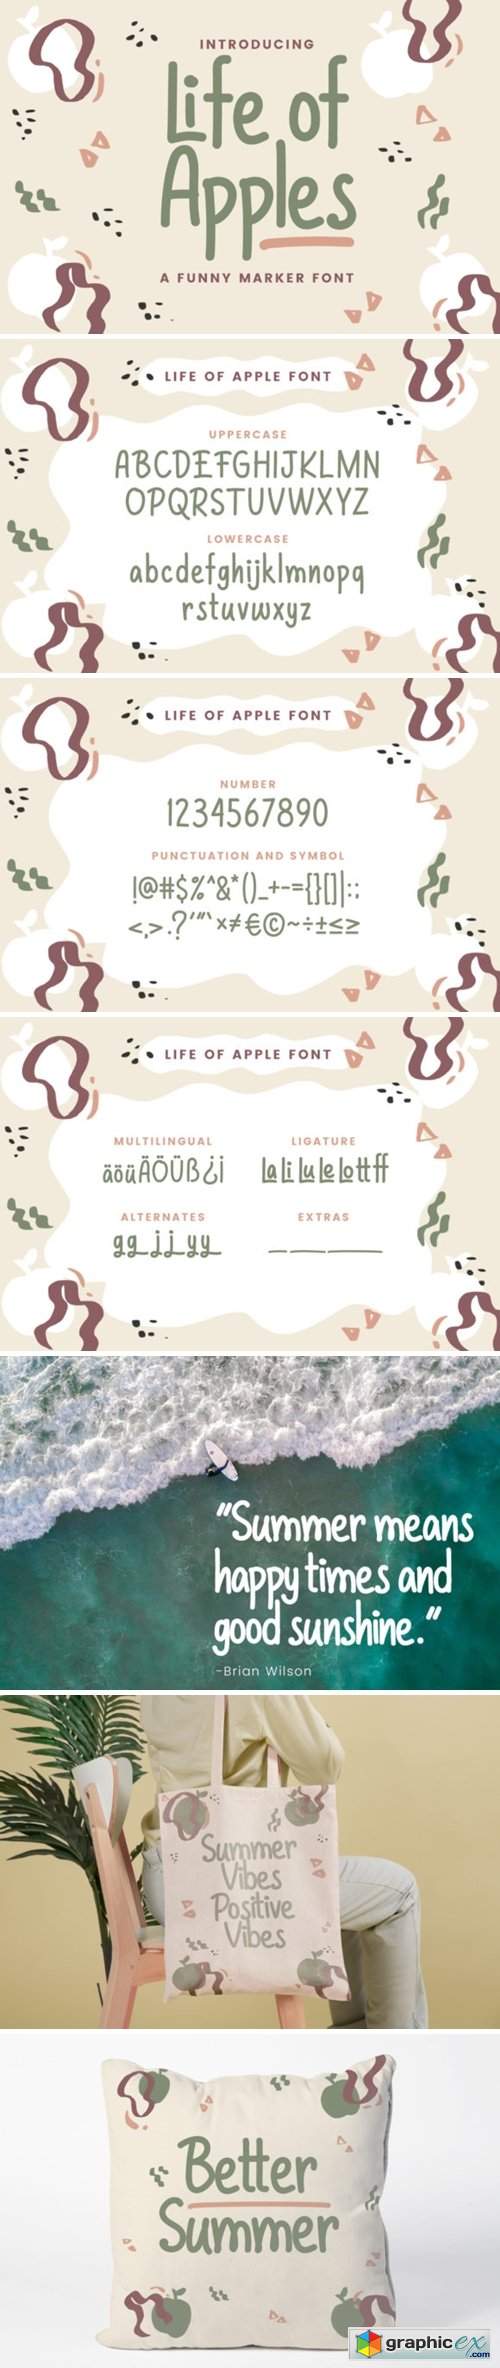  Life of Apples Font 